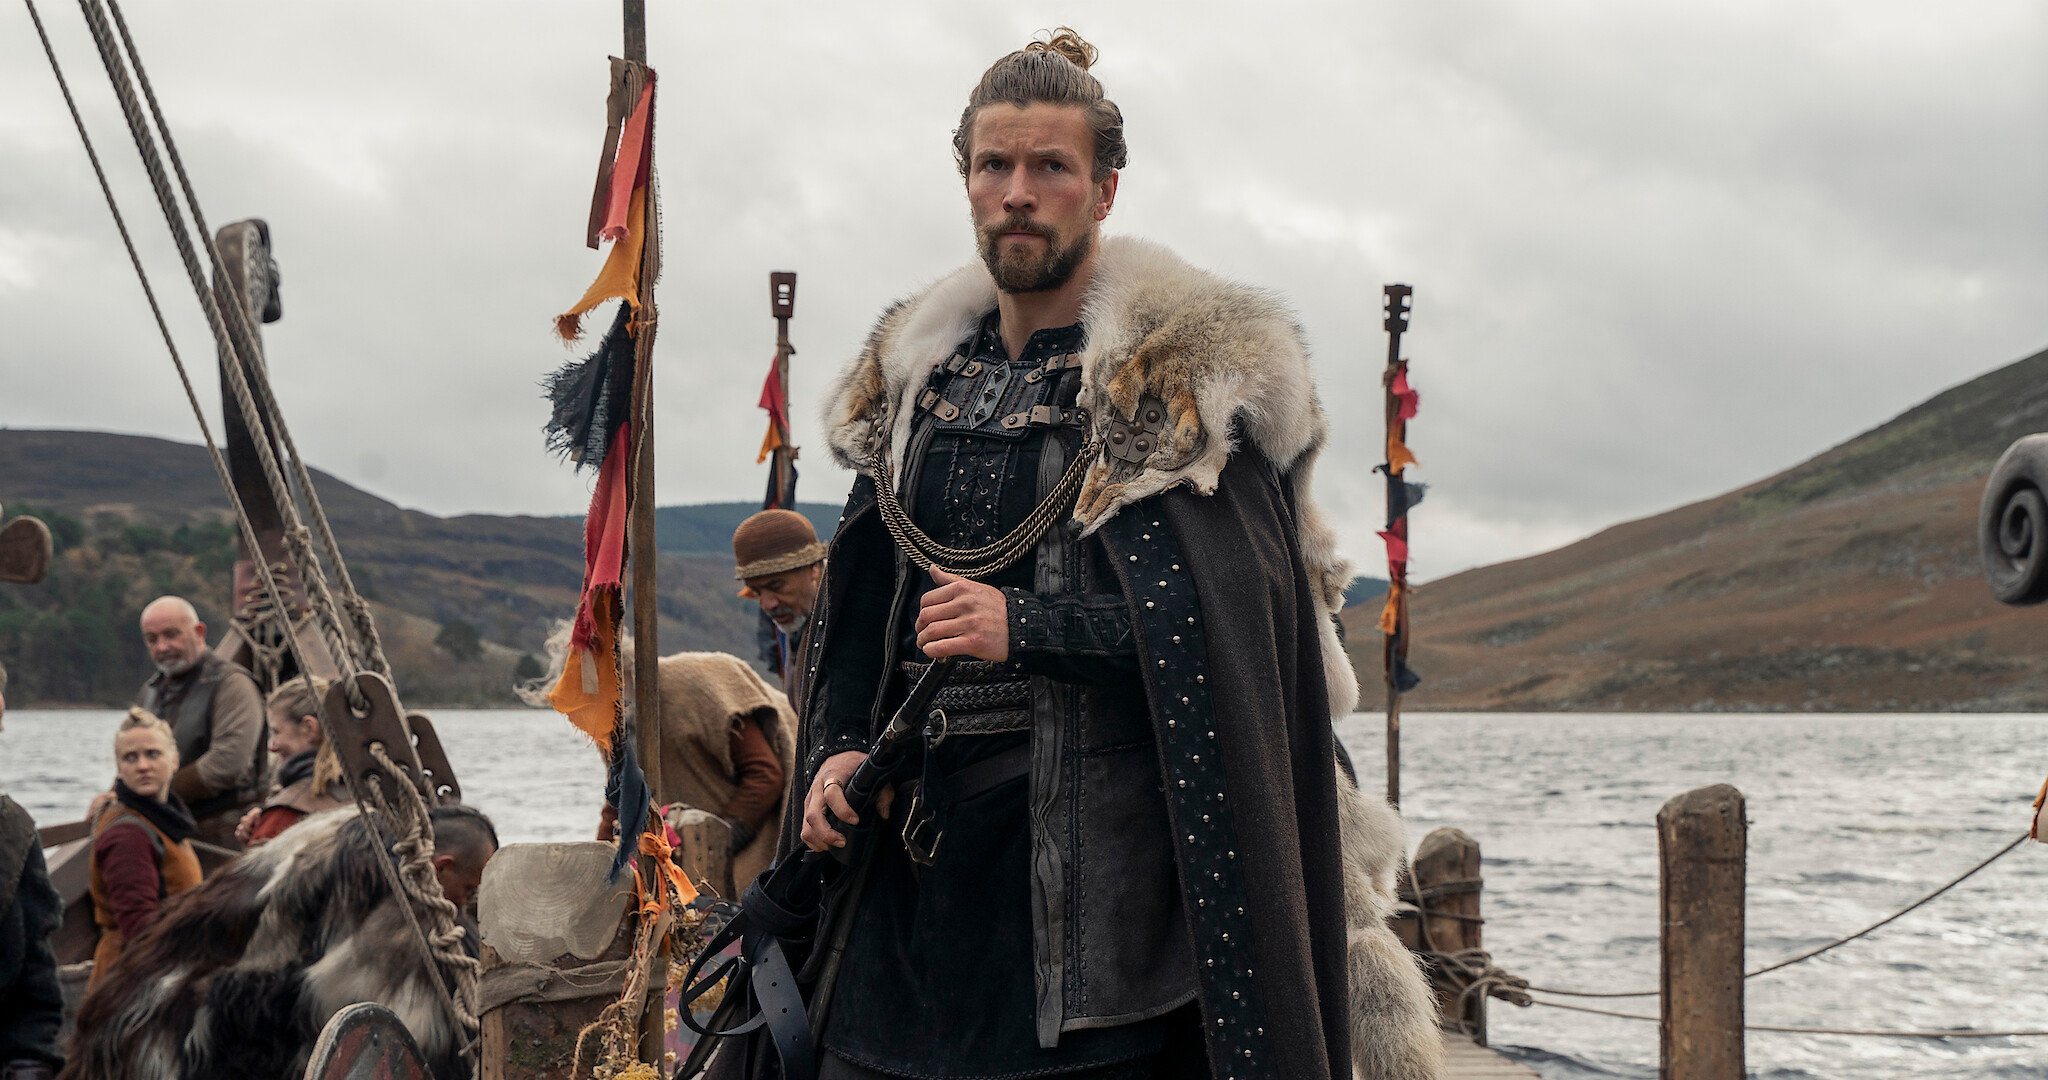 What 15 Actors From “Vikings” Look Like in Real Life / Bright Side